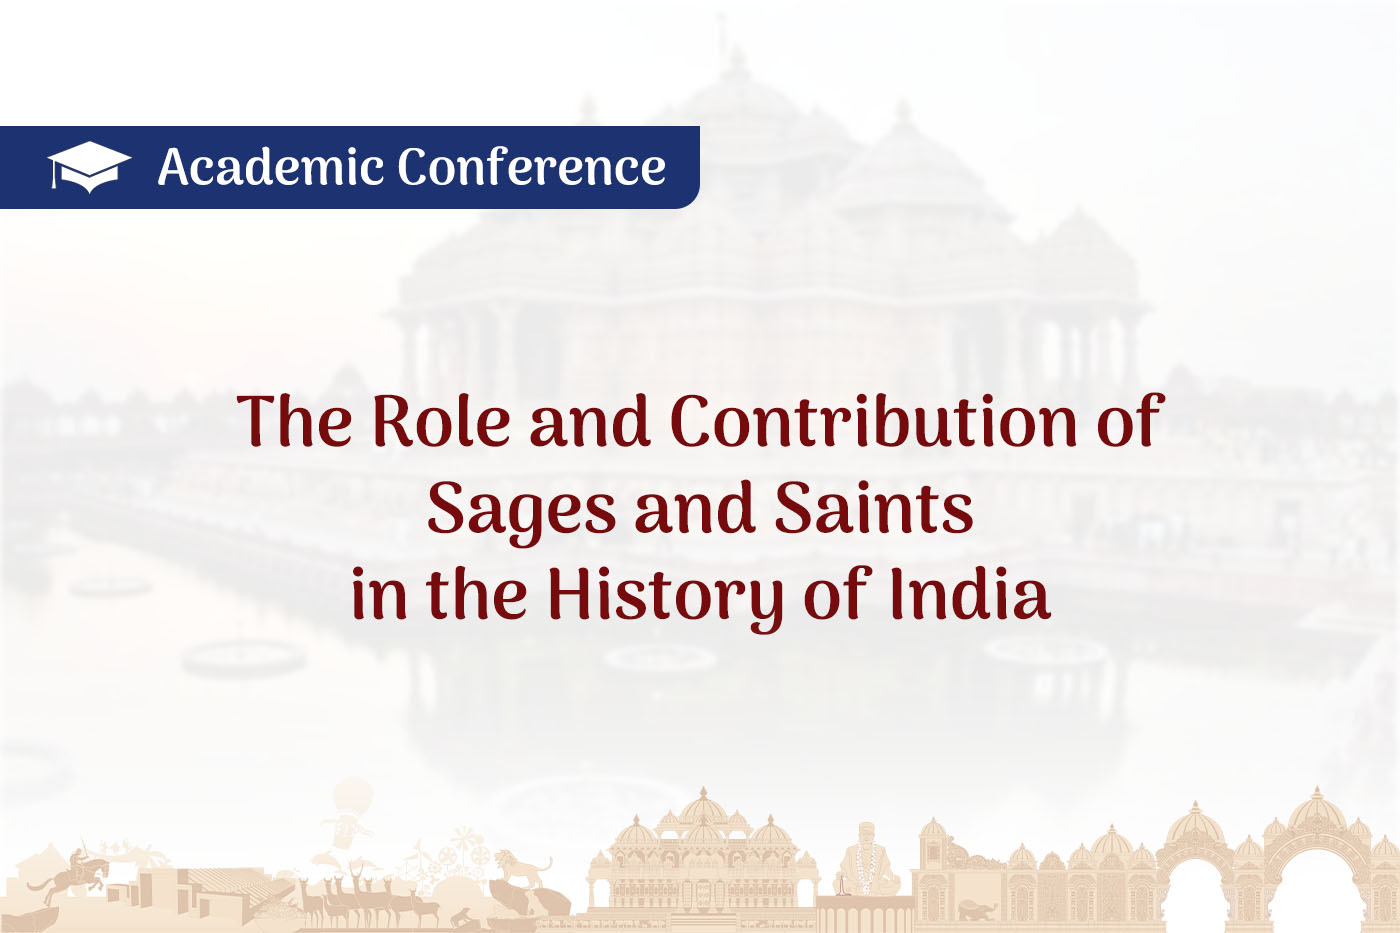 The Role and Contribution of Sages and Saints in the History of India